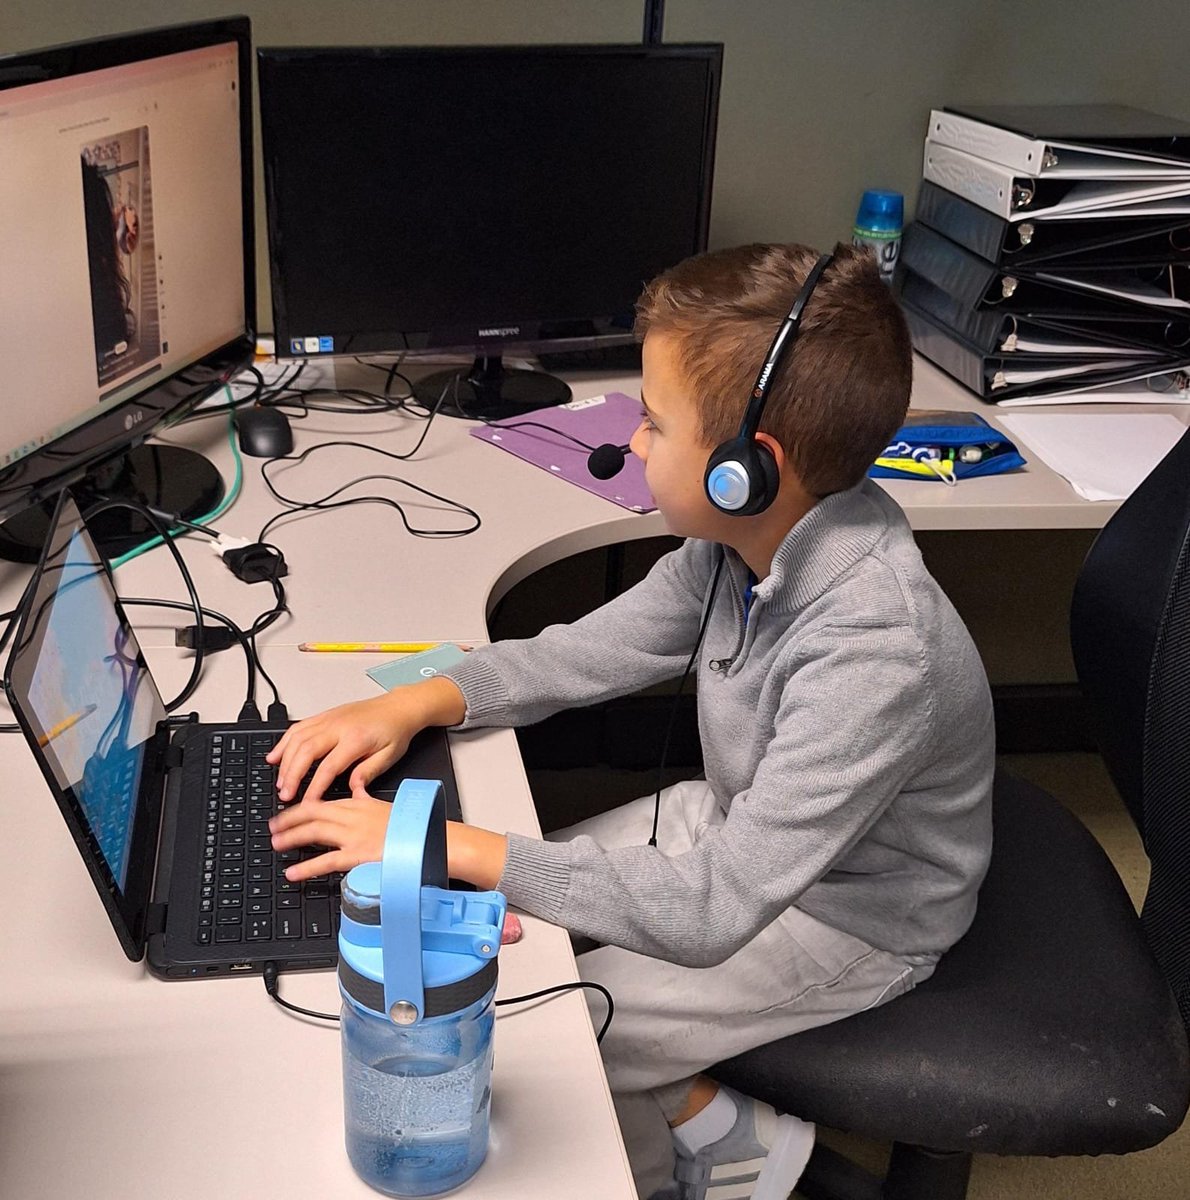 Take Your Child to Work Day Success! 🌟 It's a fantastic way to inspire the next generation and give them a glimpse into the world of IT. Here's to sparking curiosity and future innovation! 

#FutureTechies #TakeYourChildToWorkDay #FamilyDay #Ten4Tech